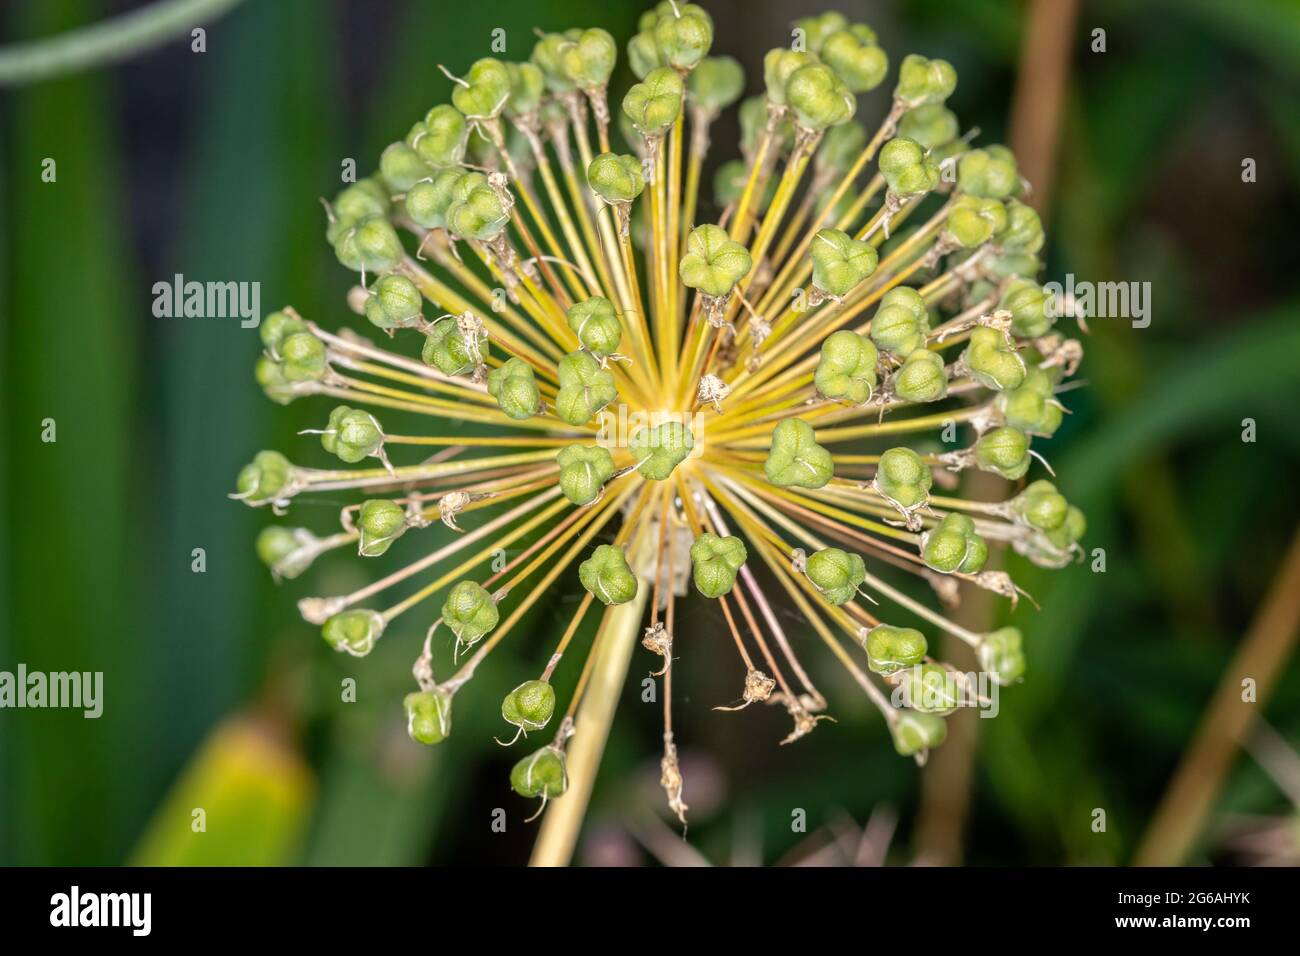 Close up of alium flower head with green seed pods, - radial pattern Stock Photo